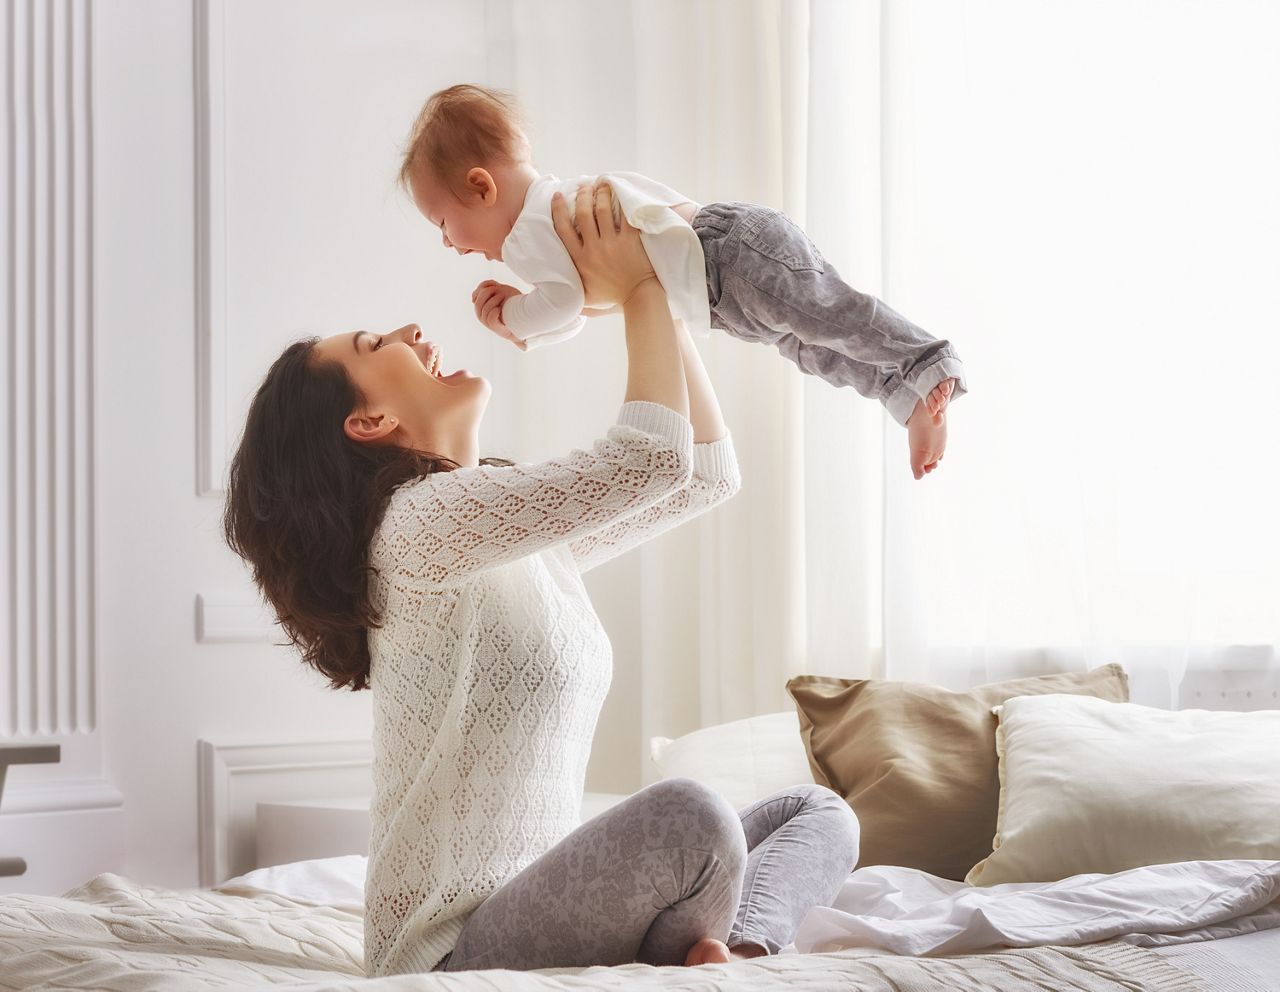 happy loving family. mother playing with her baby in the bedroom.; Shutterstock ID 398163976; purchase_order: DNC Thumbnails; job: Webinars 4 ; client: ; other: 